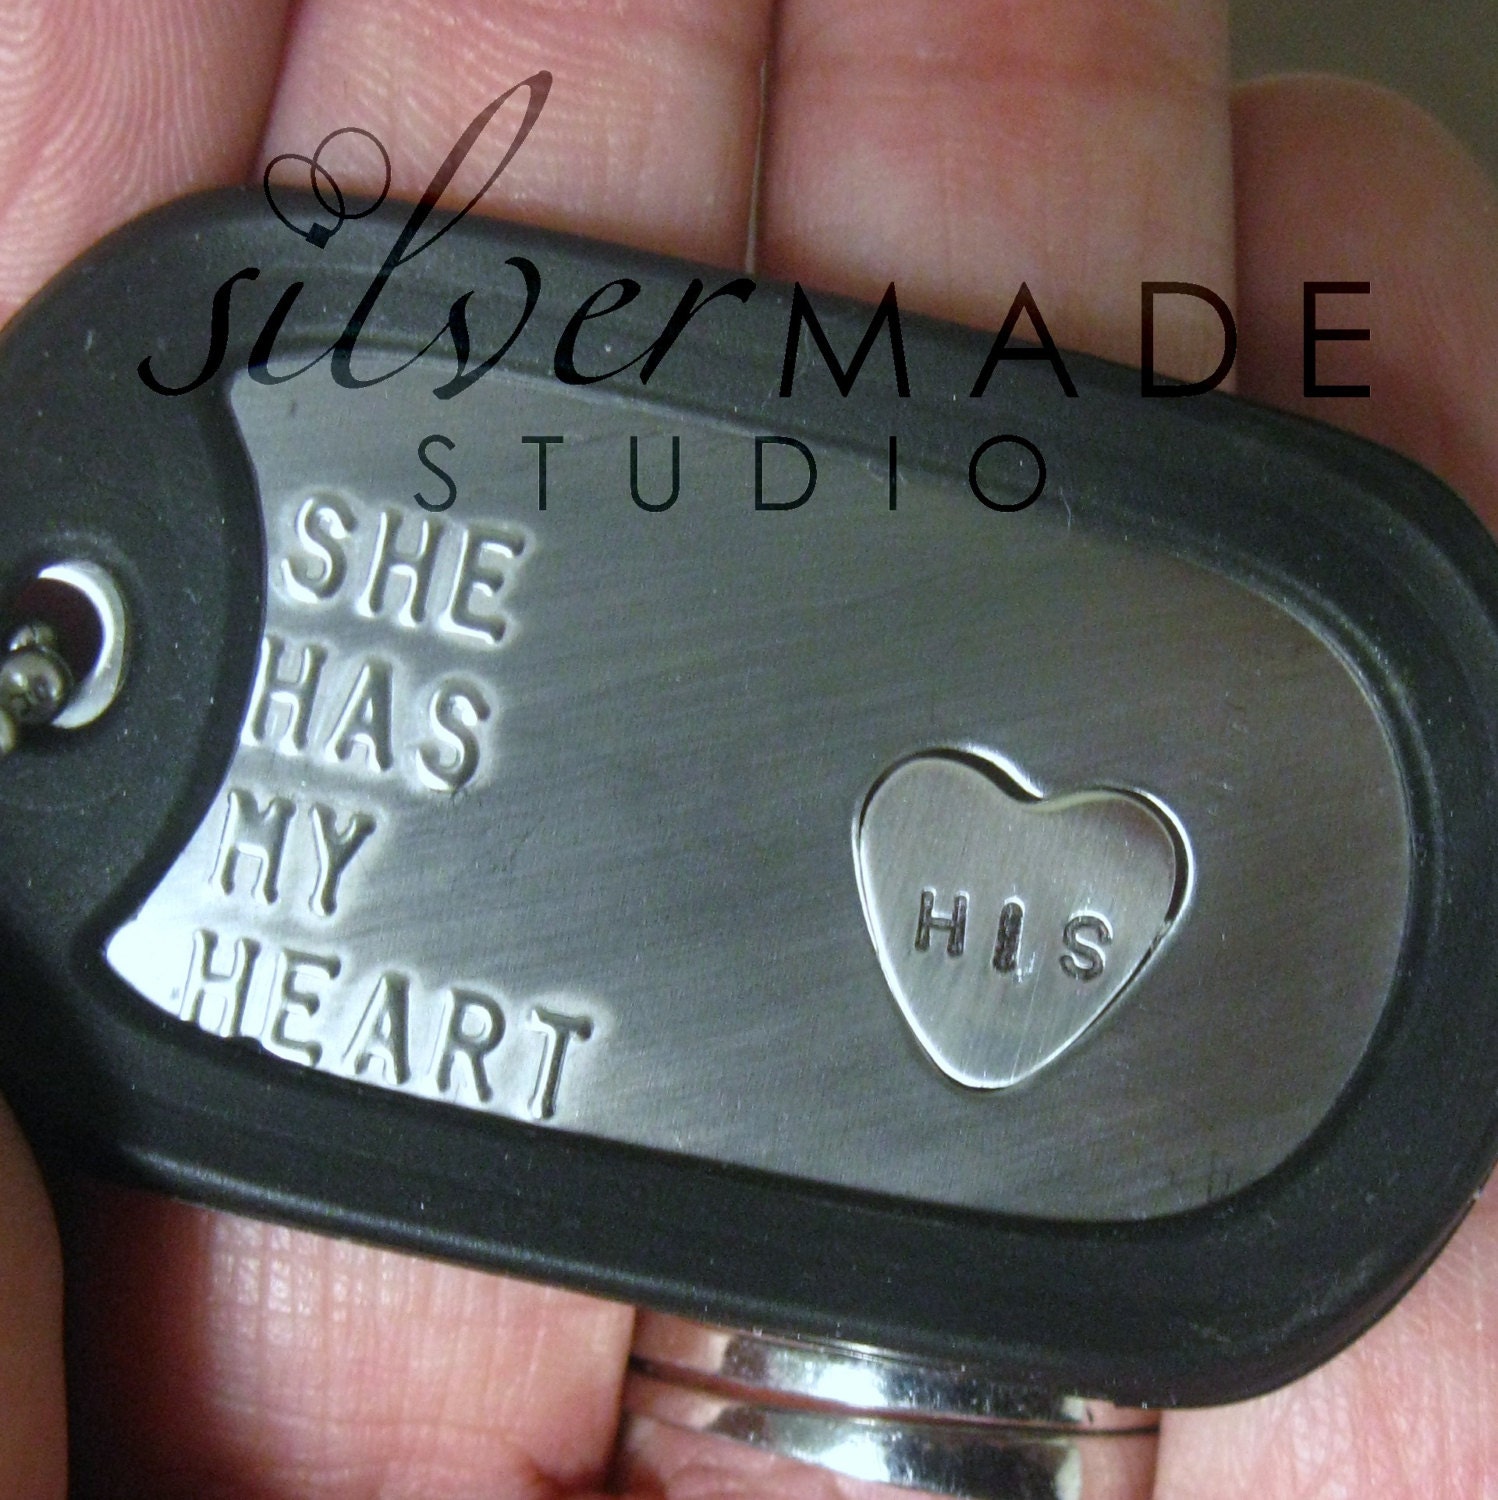 Military Stainless dogtag and sterling HEART RING - SilverMadeStudio